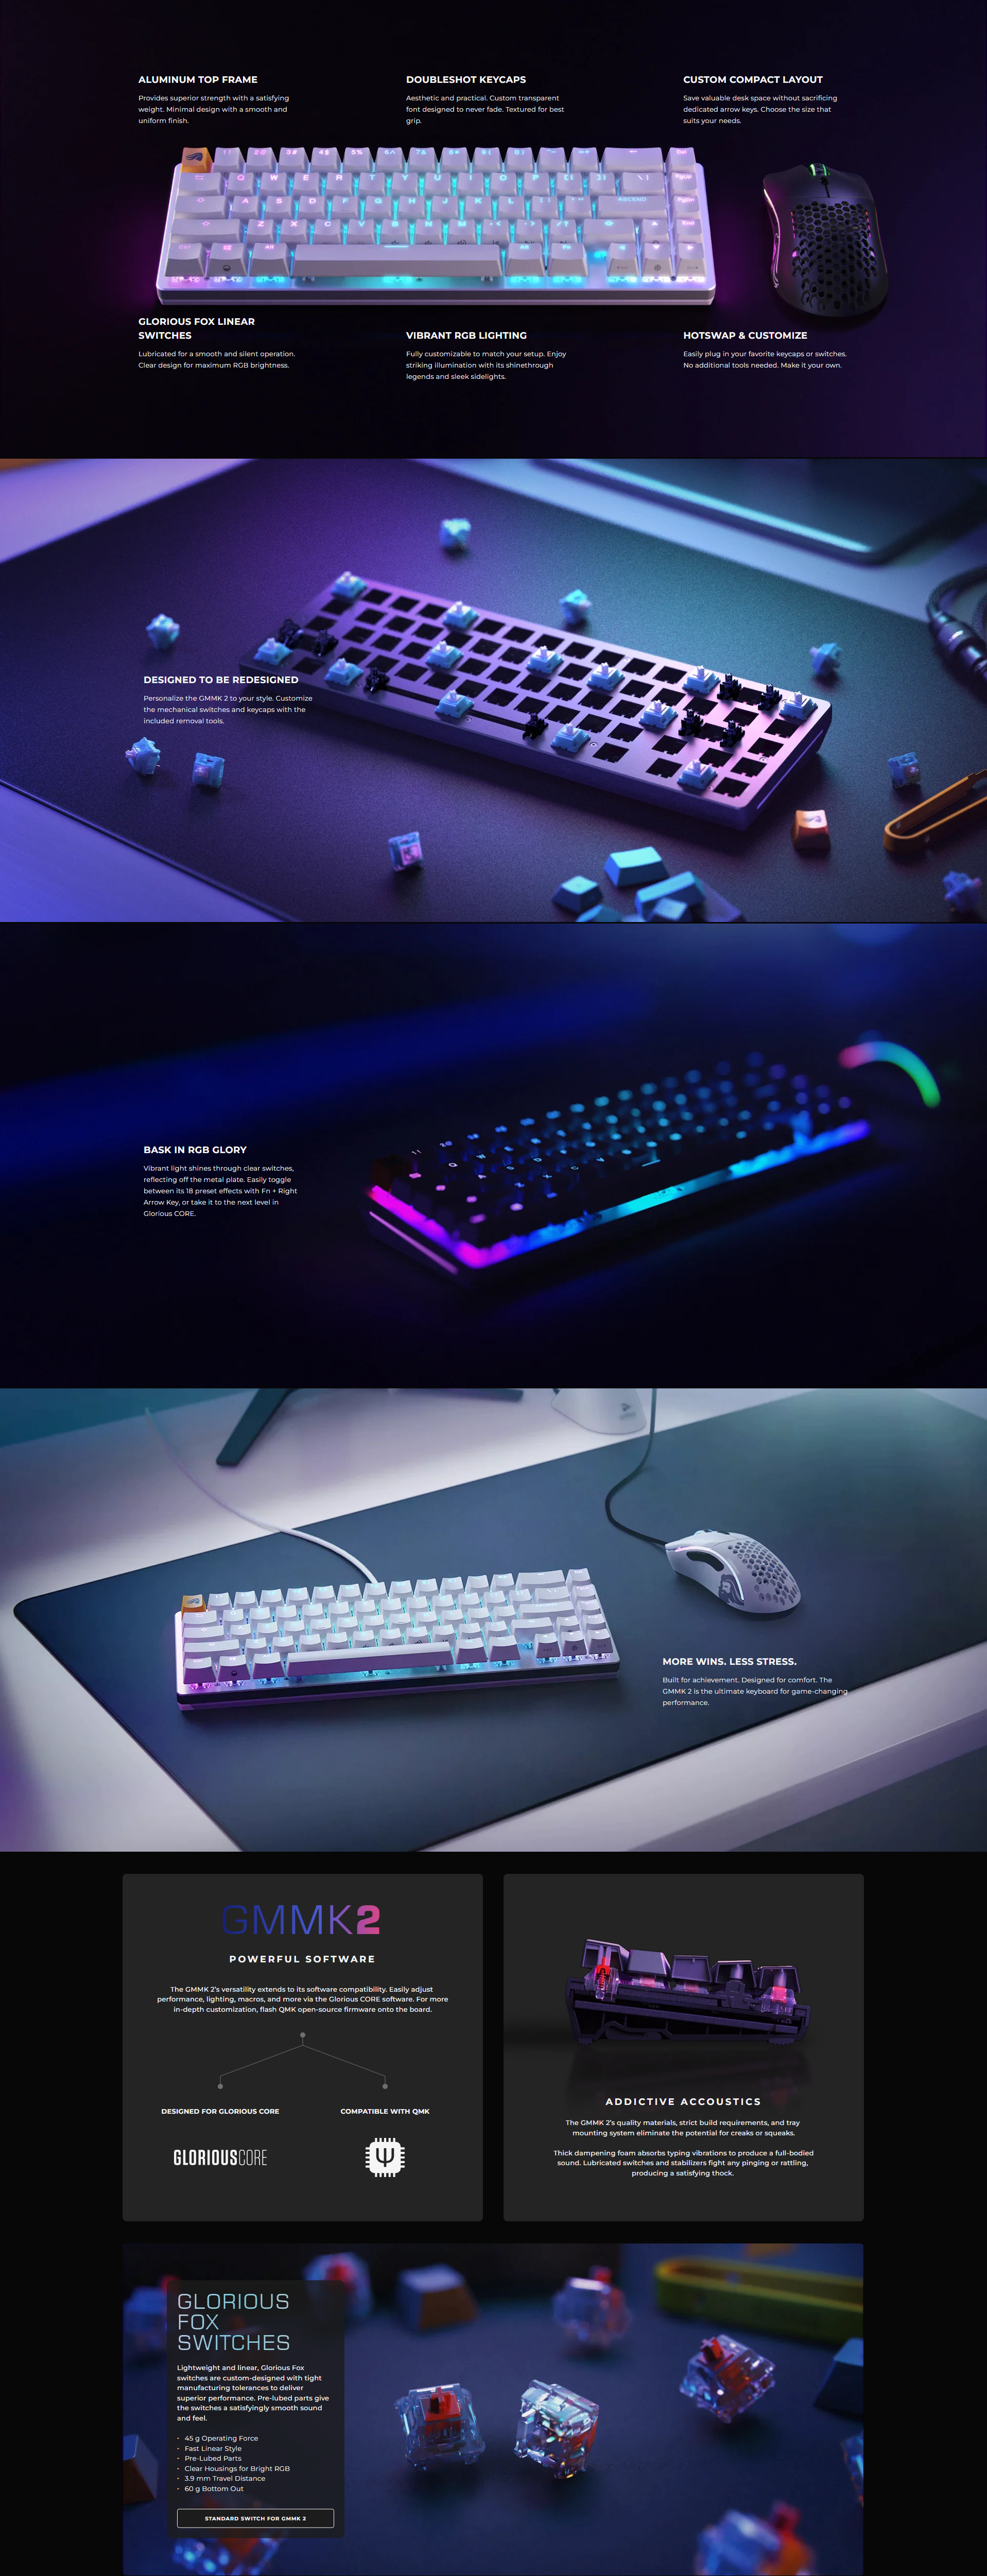 A large marketing image providing additional information about the product Glorious GMMK 2 Compact Mechanical Keyboard - White (Prebuilt) - Additional alt info not provided